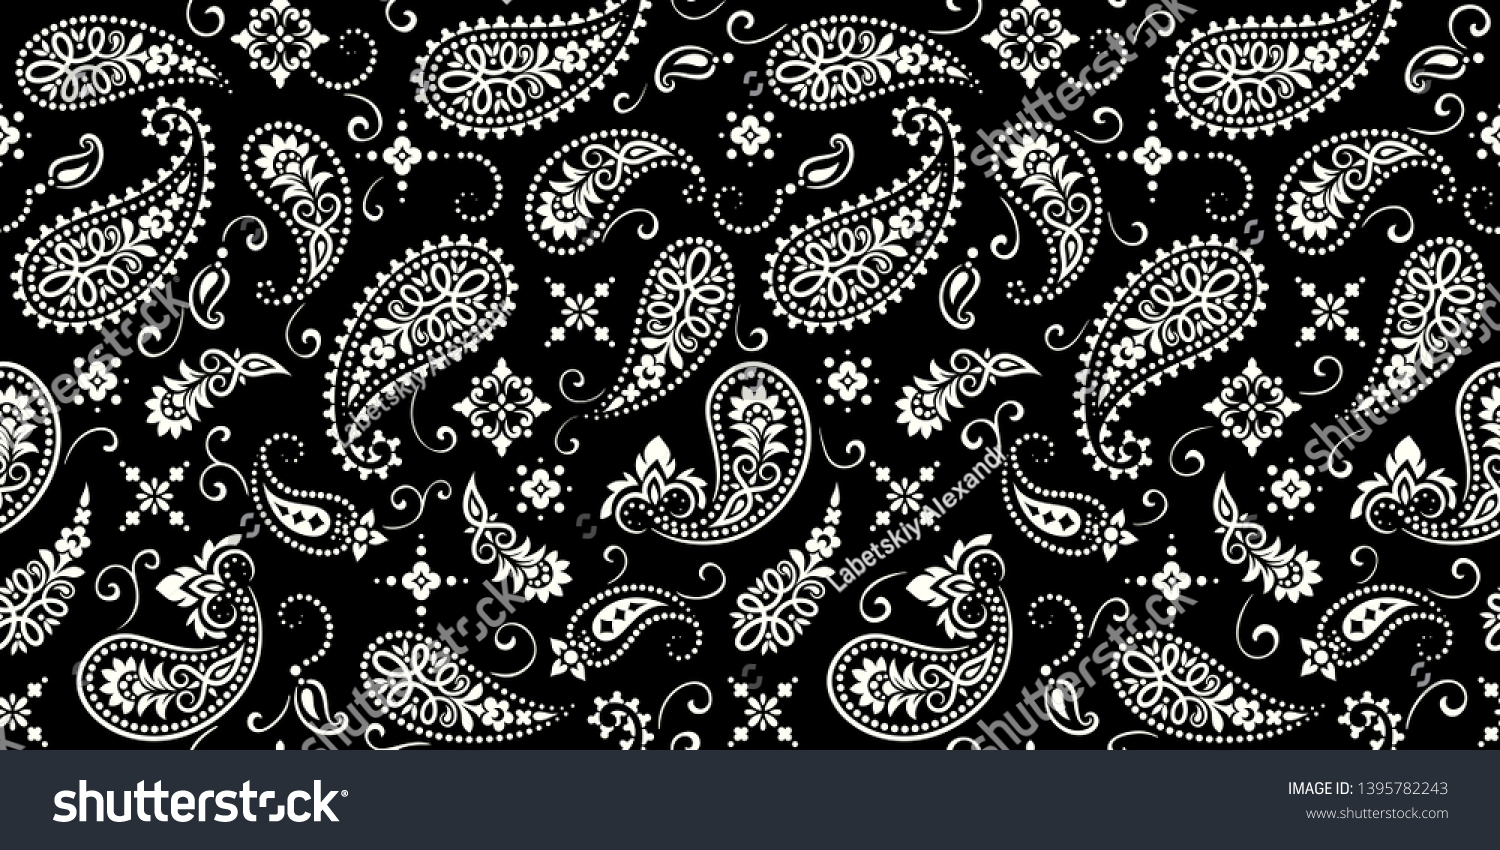 SVG of Seamless pattern based on ornament paisley Bandana Print. Vector ornament paisley Bandana Print. Silk neck scarf or kerchief square pattern design style, best motive for print on fabric or papper. svg